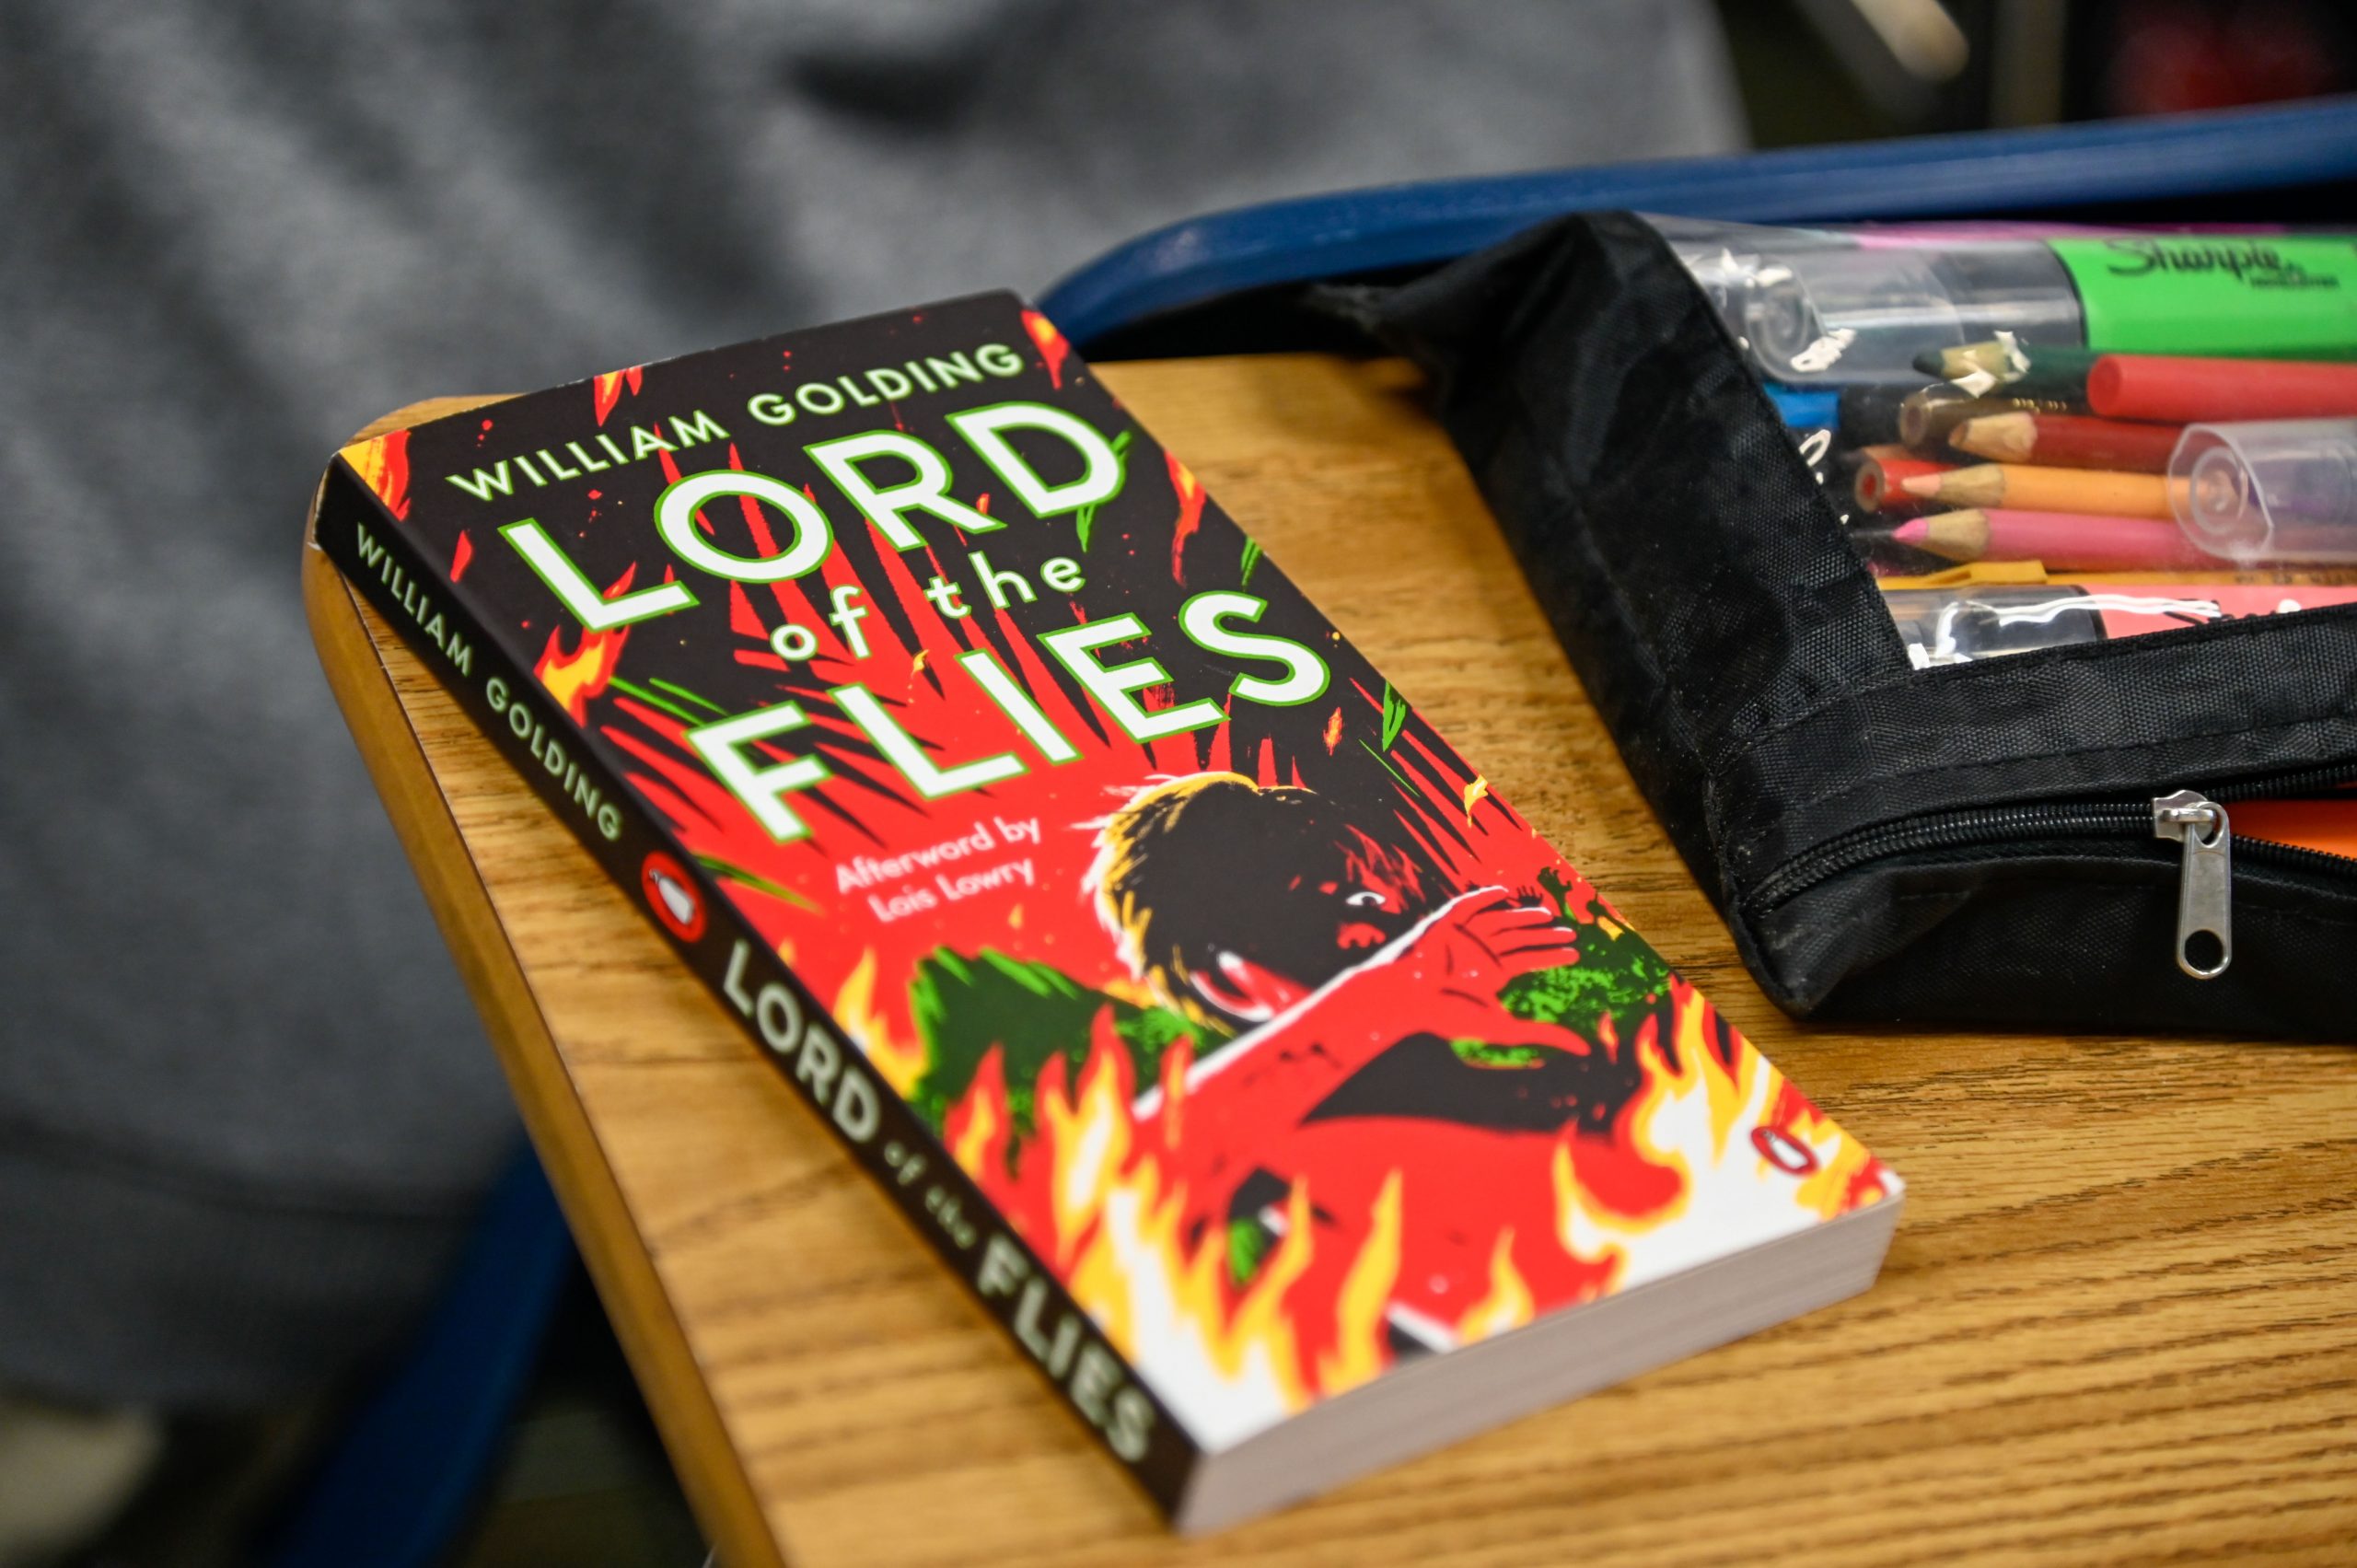 Students experience a simulation of Lord of the Flies.